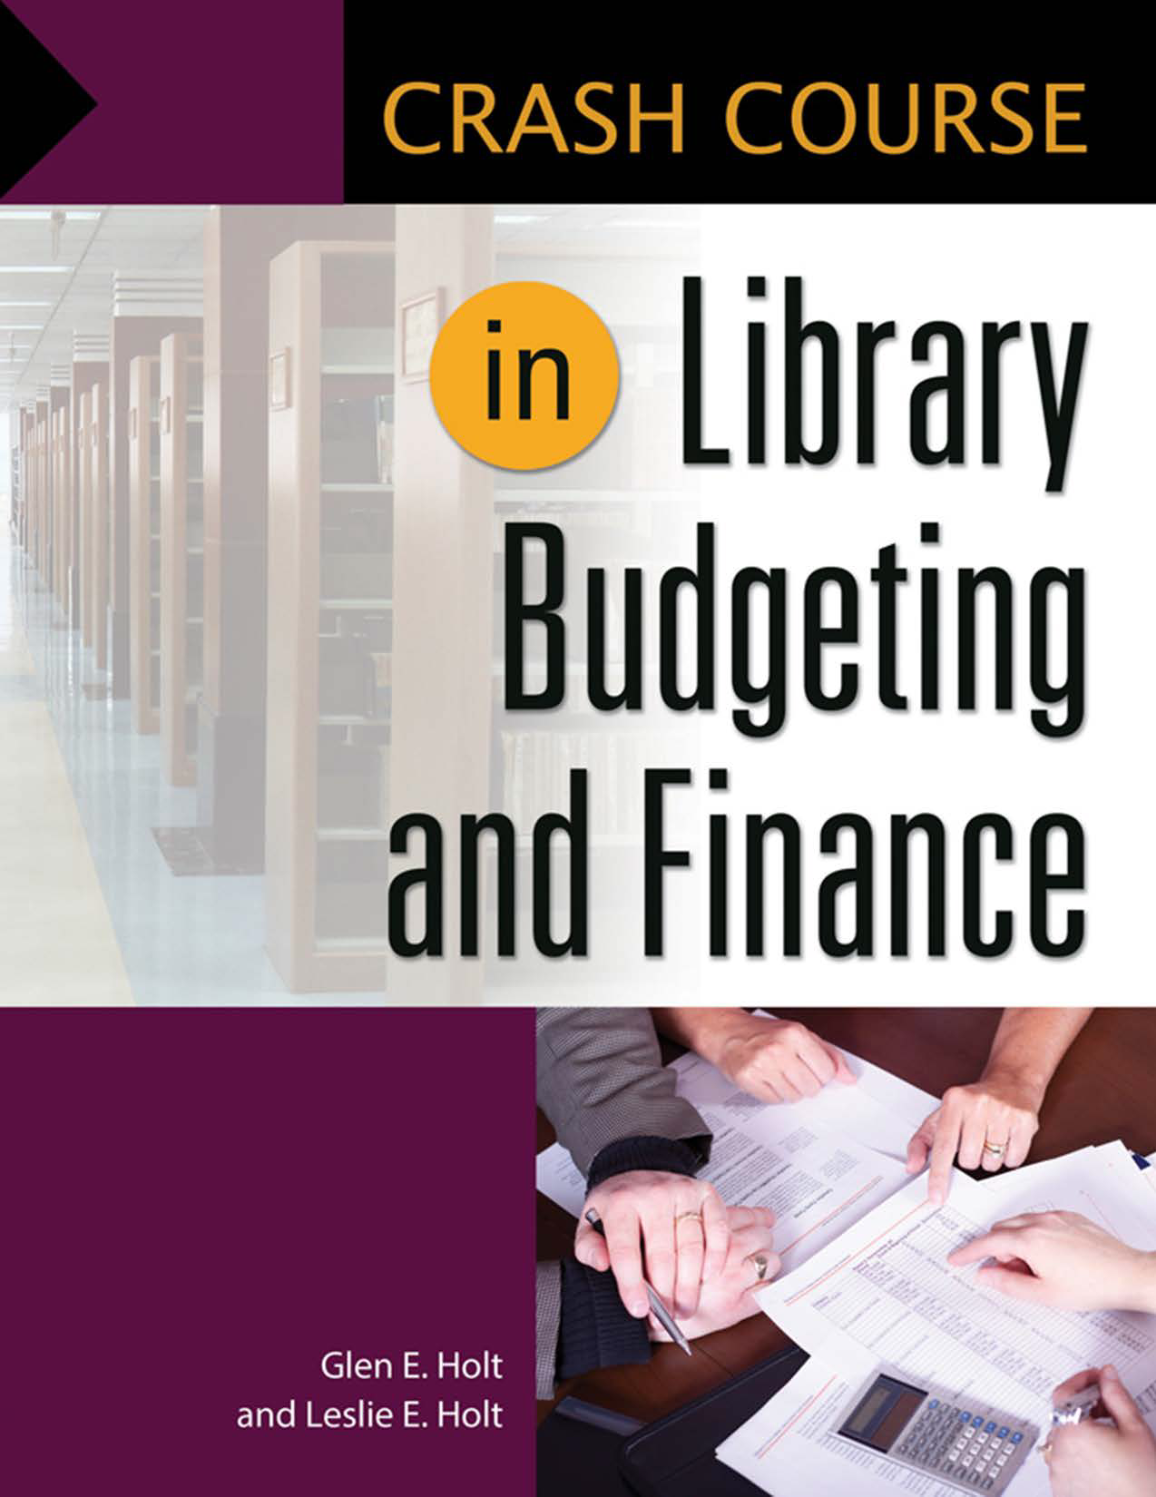 Crash Course in Library Budgeting and Finance page Cover1